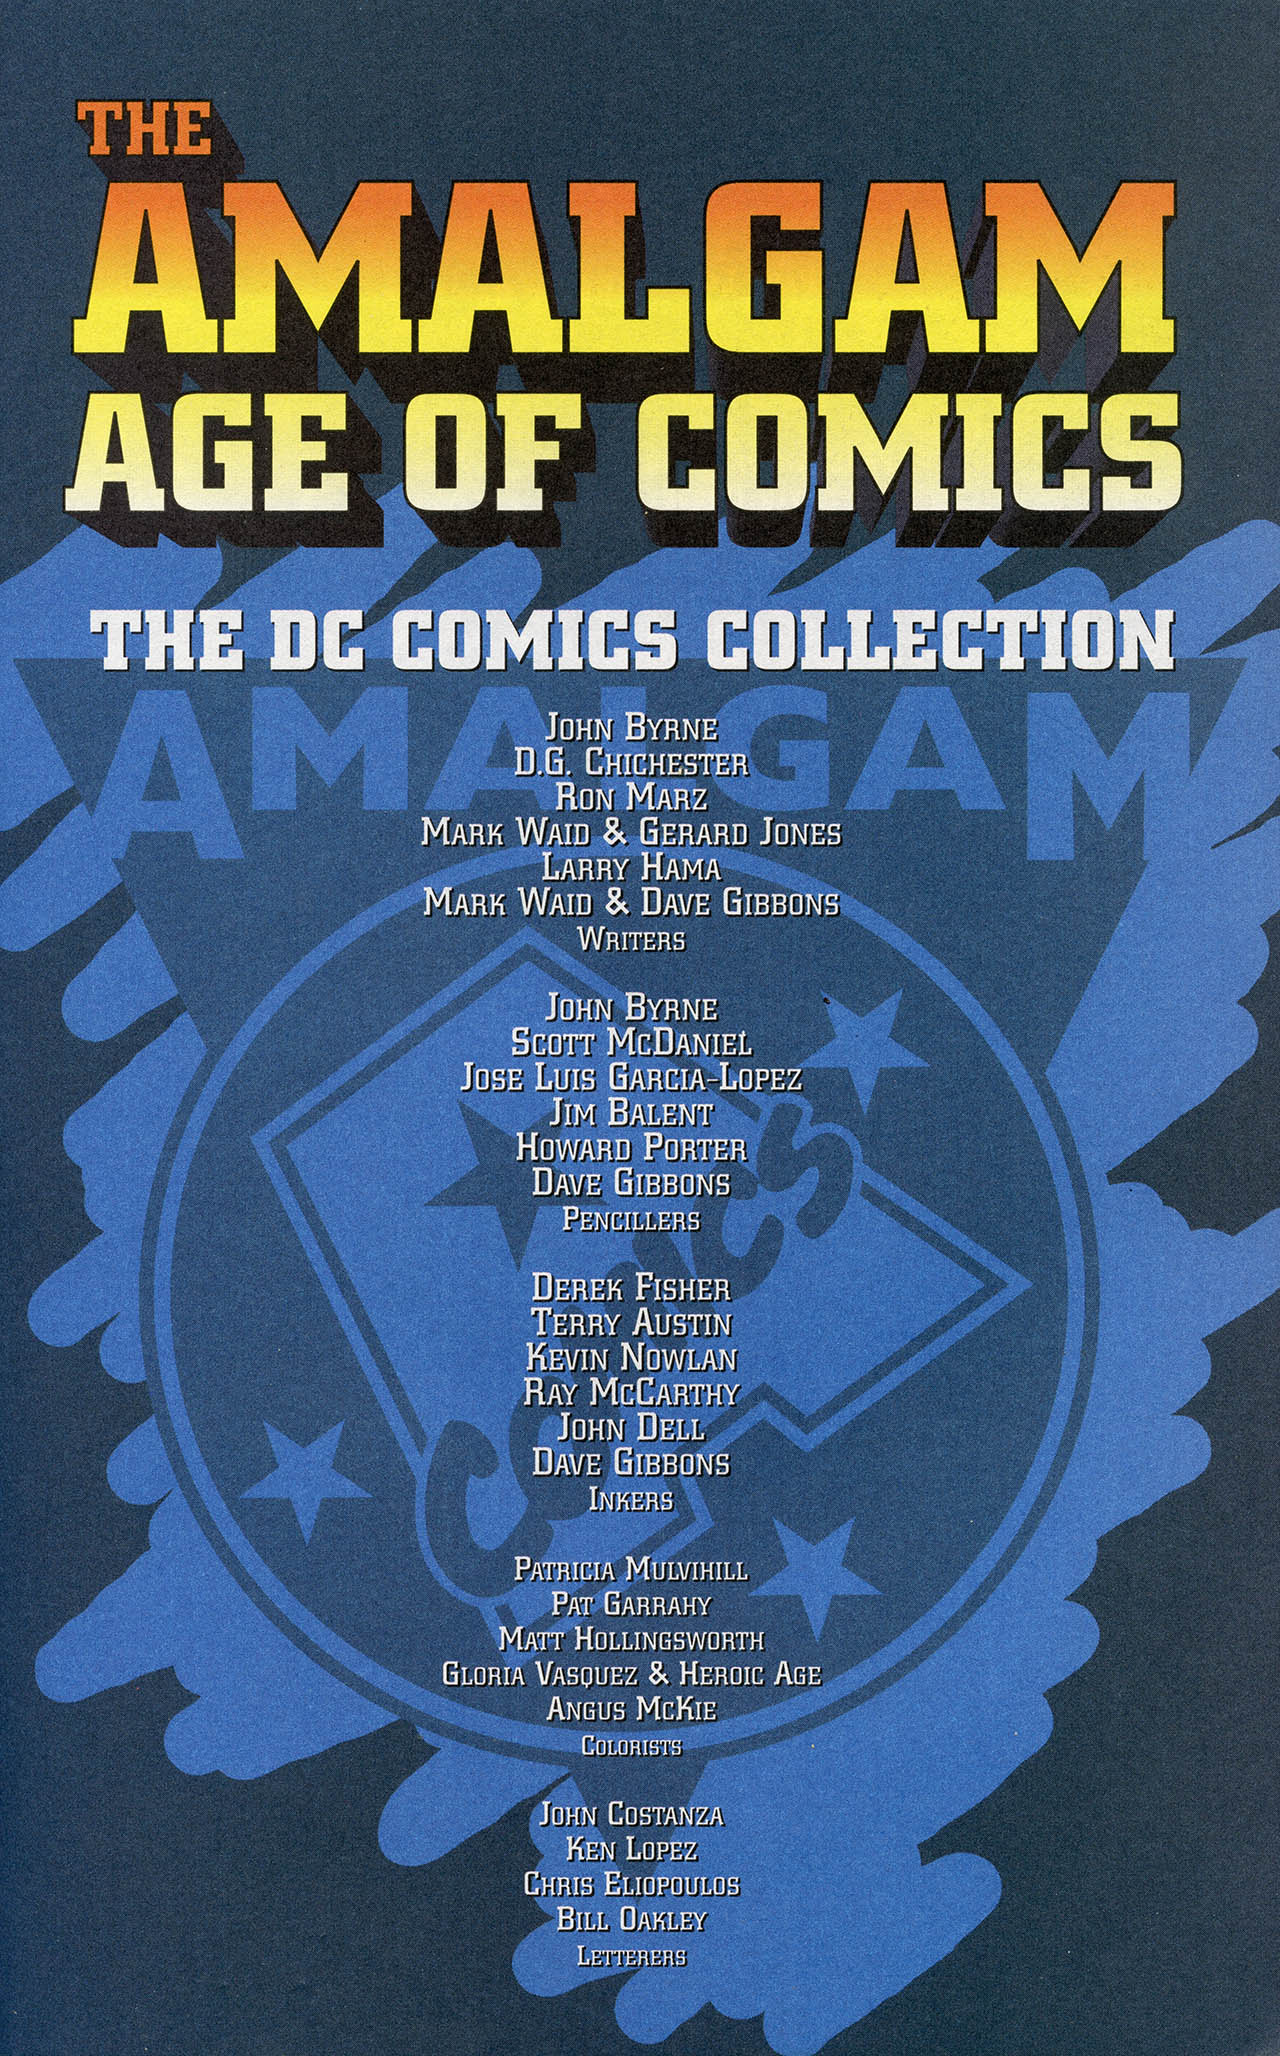 Read online The Amalgam Age of Comics: The DC Comics Collection comic -  Issue # TPB (Part 1) - 4